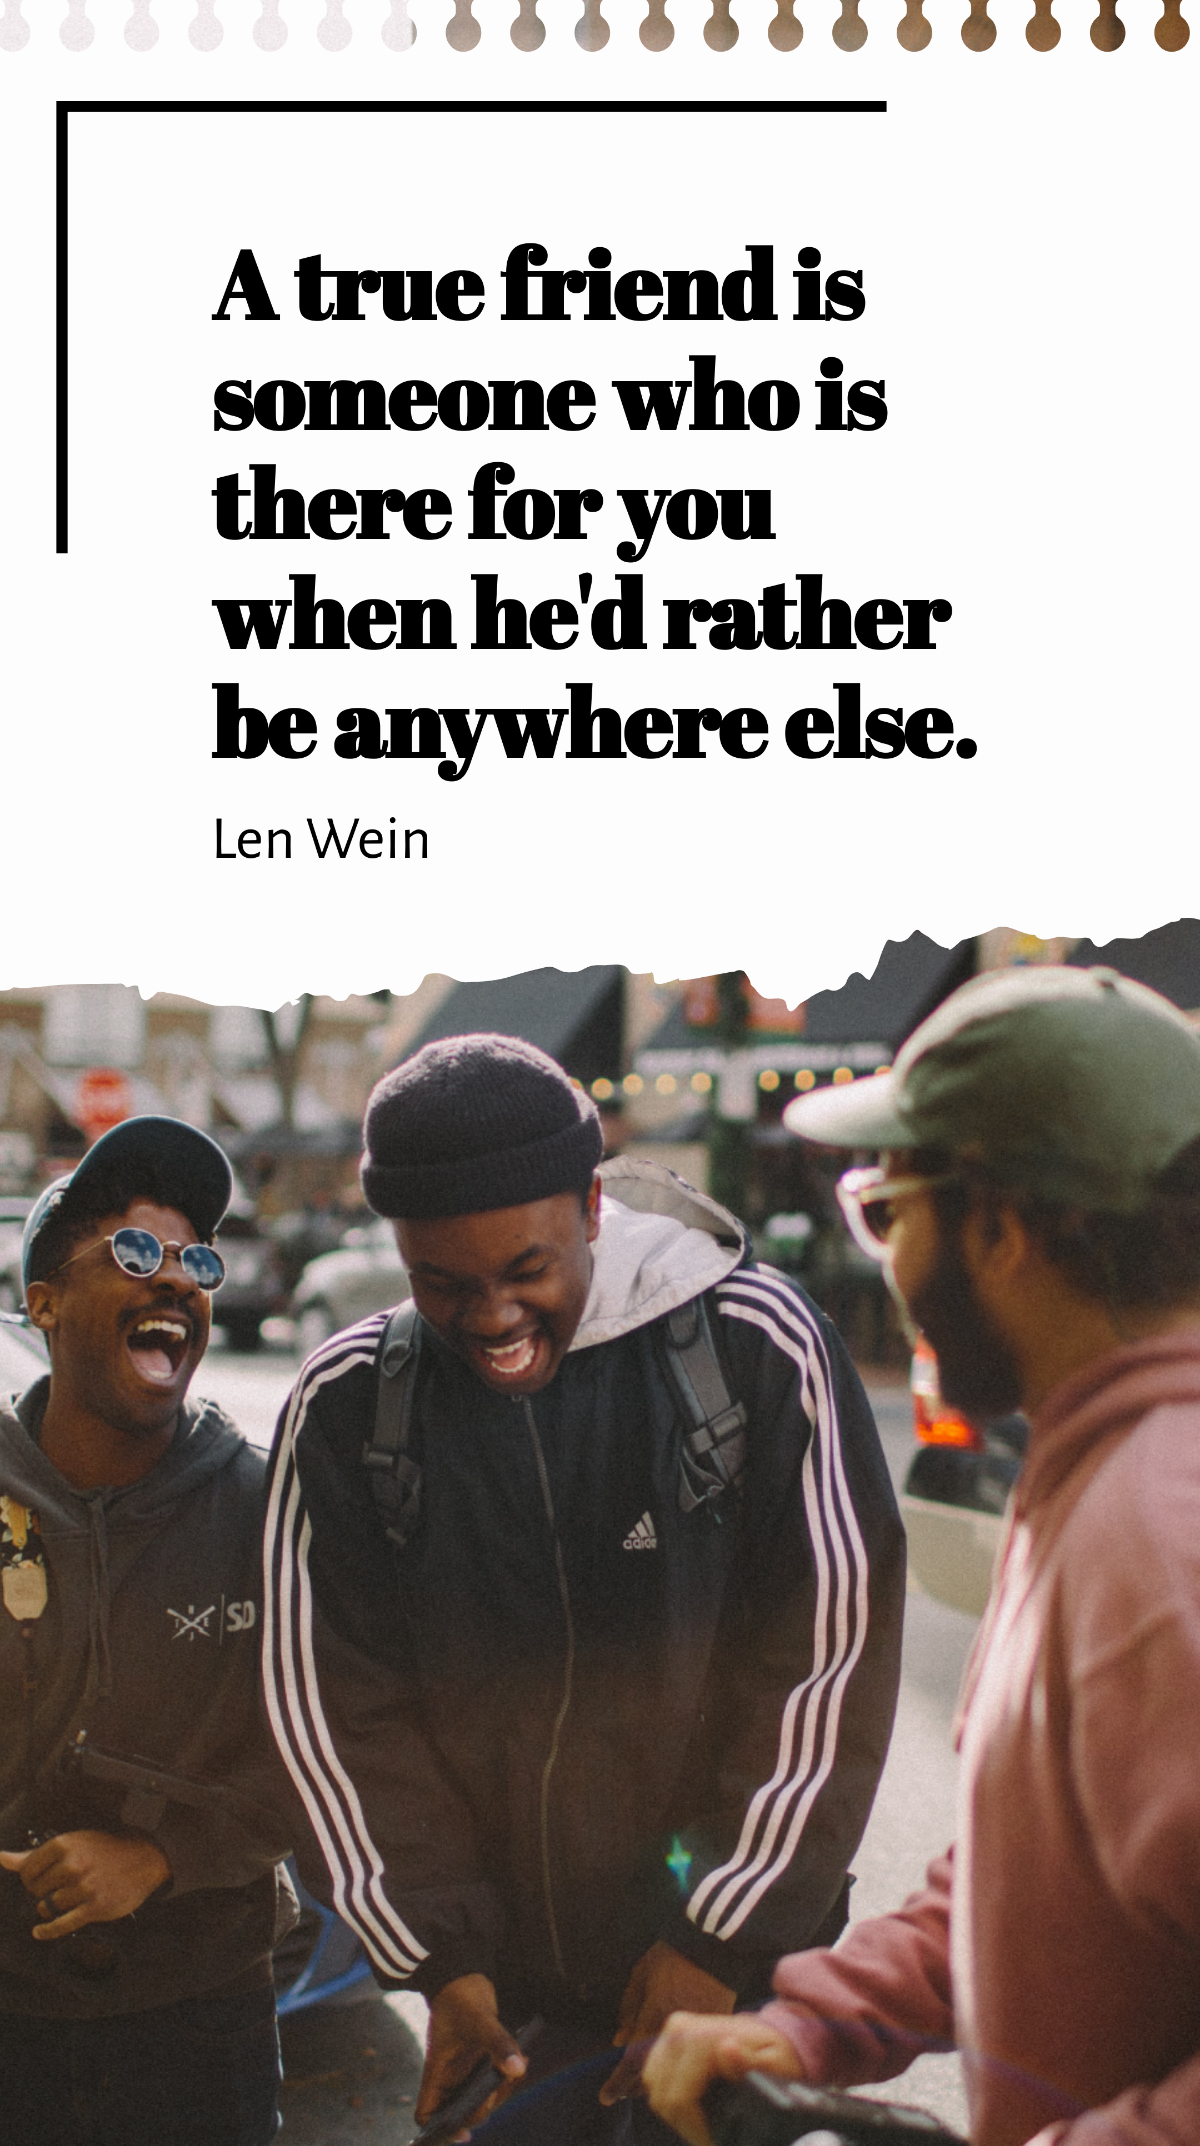 Len Wein - A true friend is someone who is there for you when he'd rather be anywhere else. Template